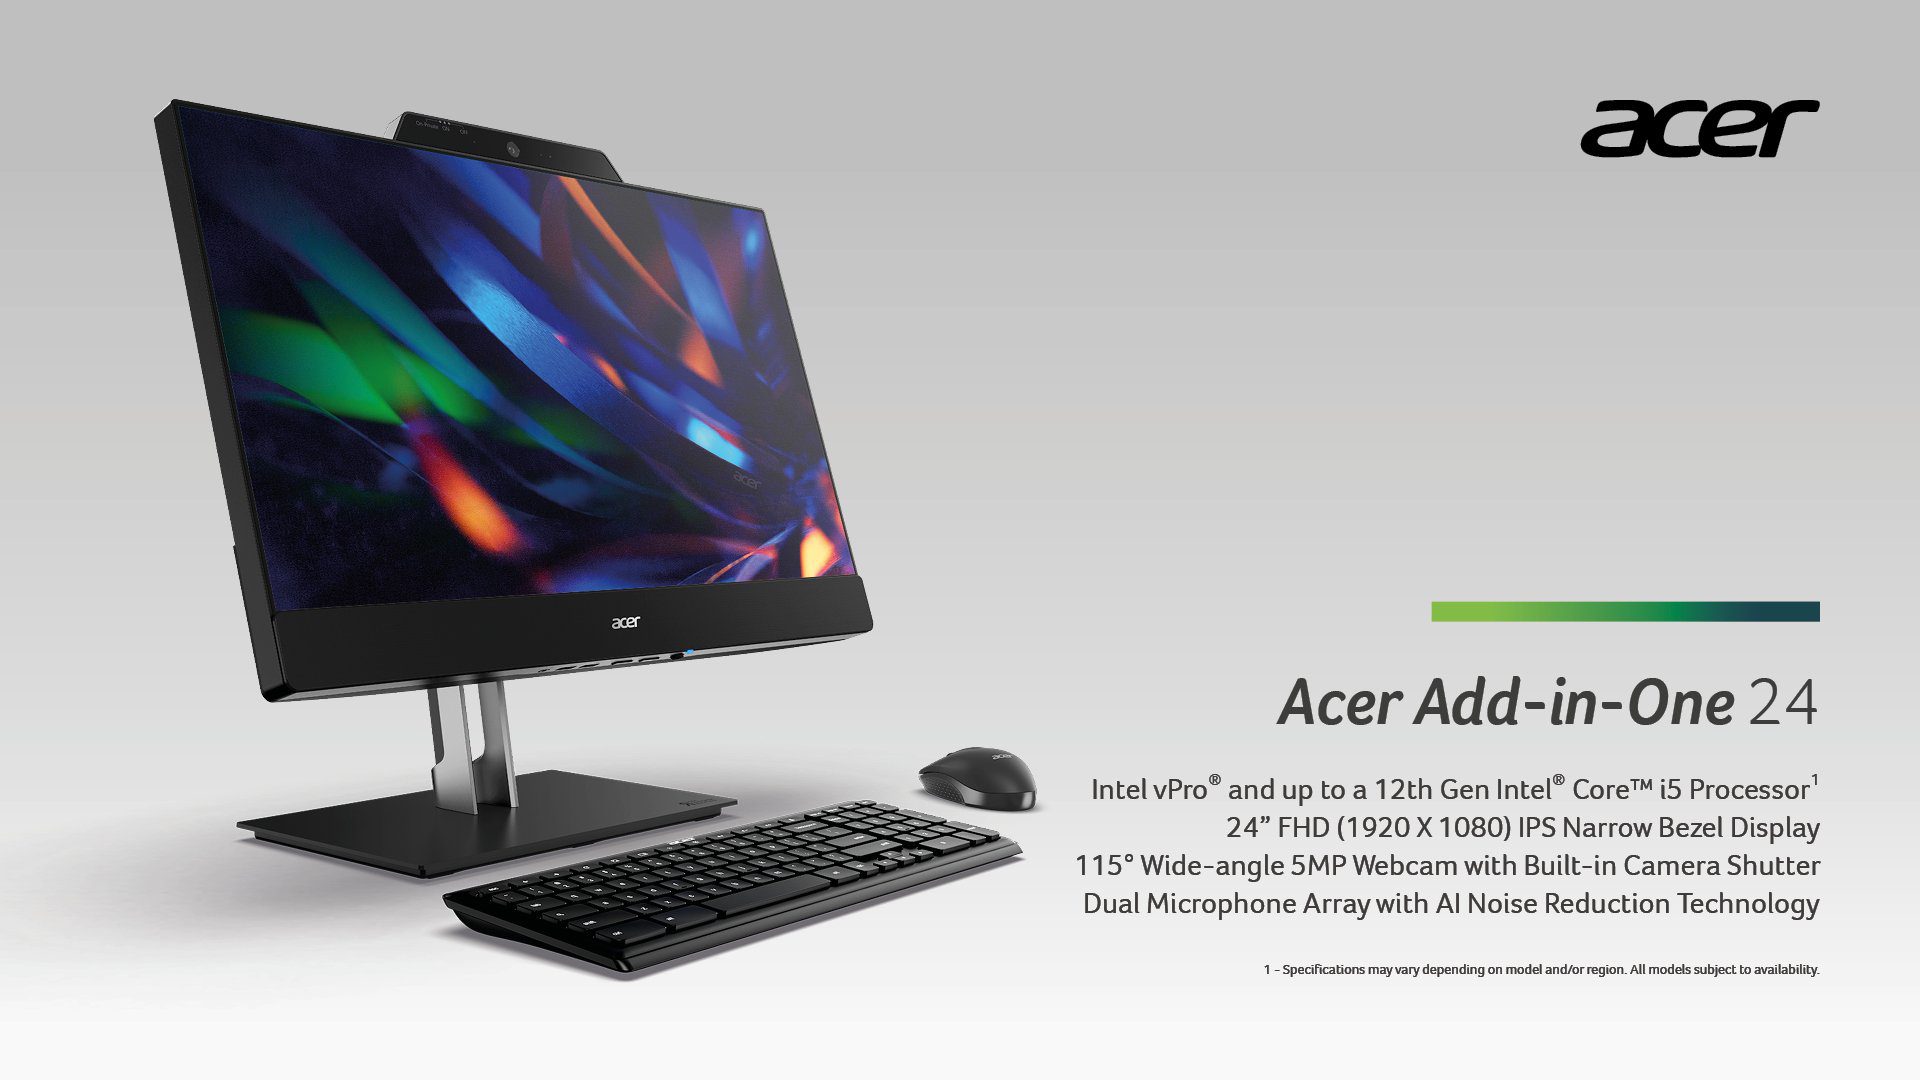 The Acer Add-in-One desktop